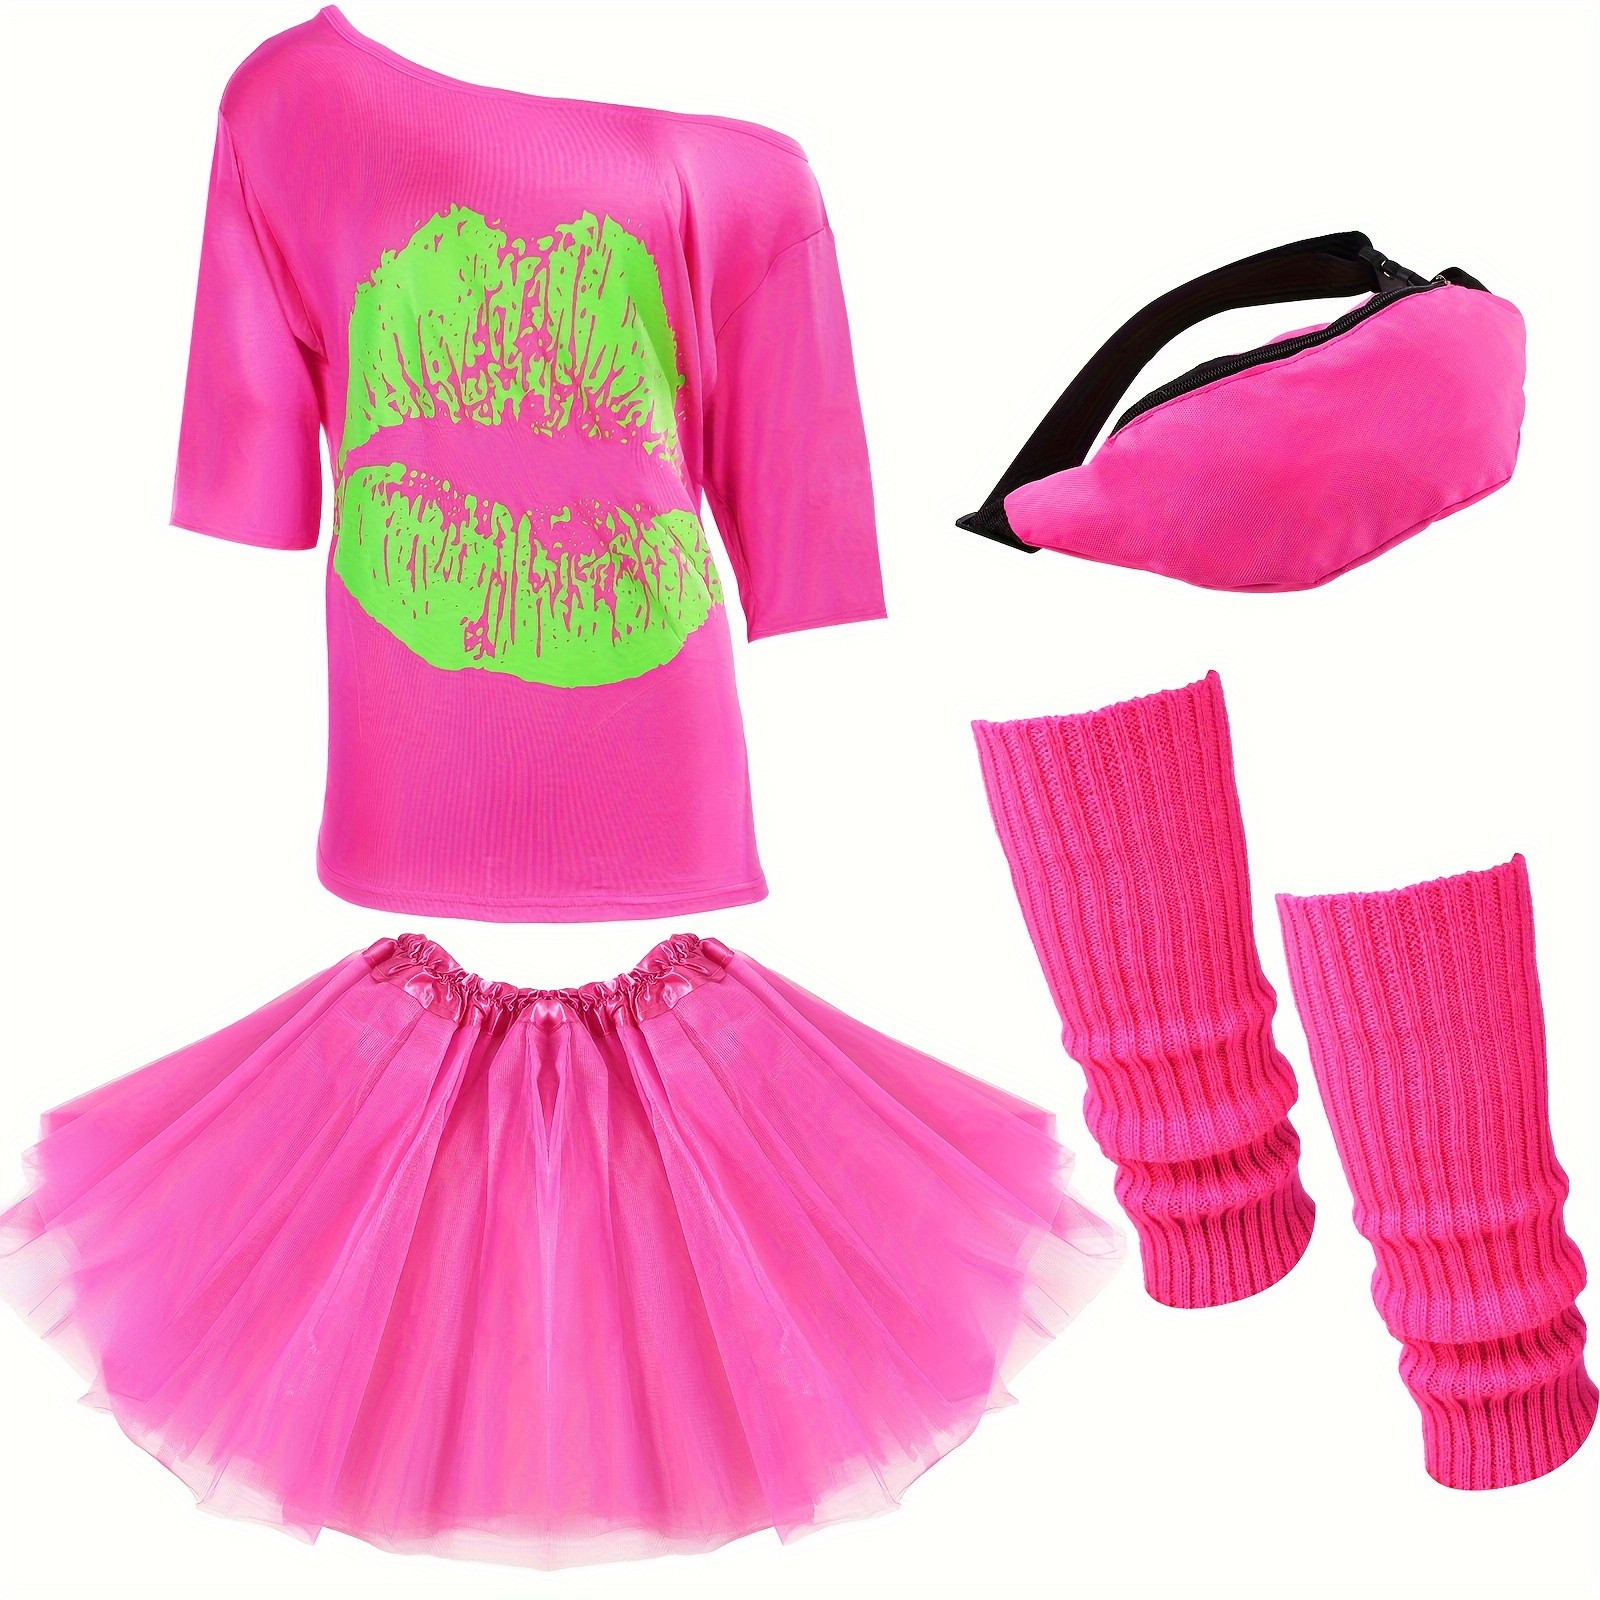 80s Costume Accessories For Women, T-shirt Tutu Fanny Pack